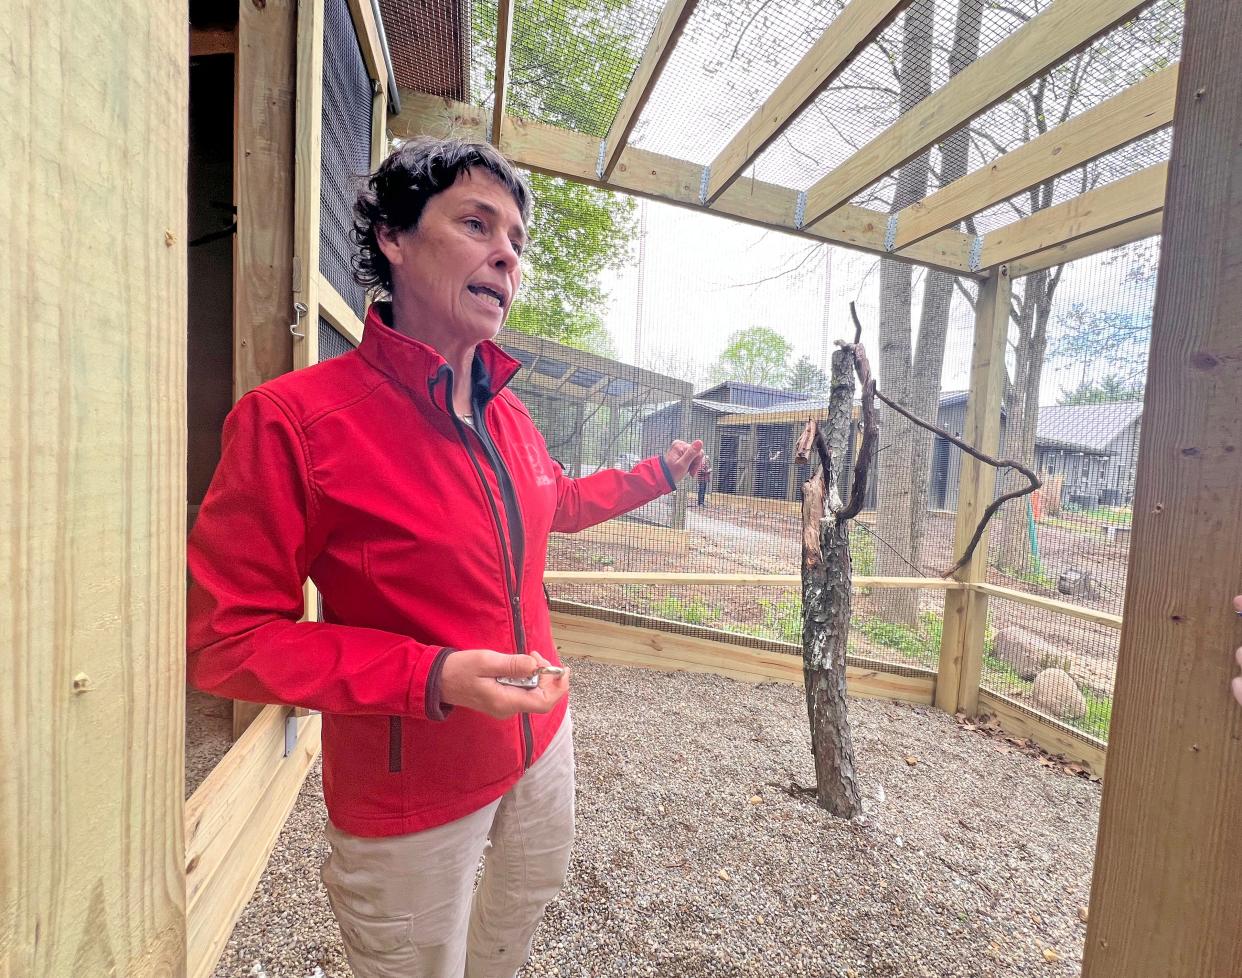 Gail Laux, founder of the Ohio Bird Sanctuary, explains the benefits of the new enclosures at the Ohio Bird Sanctuary.